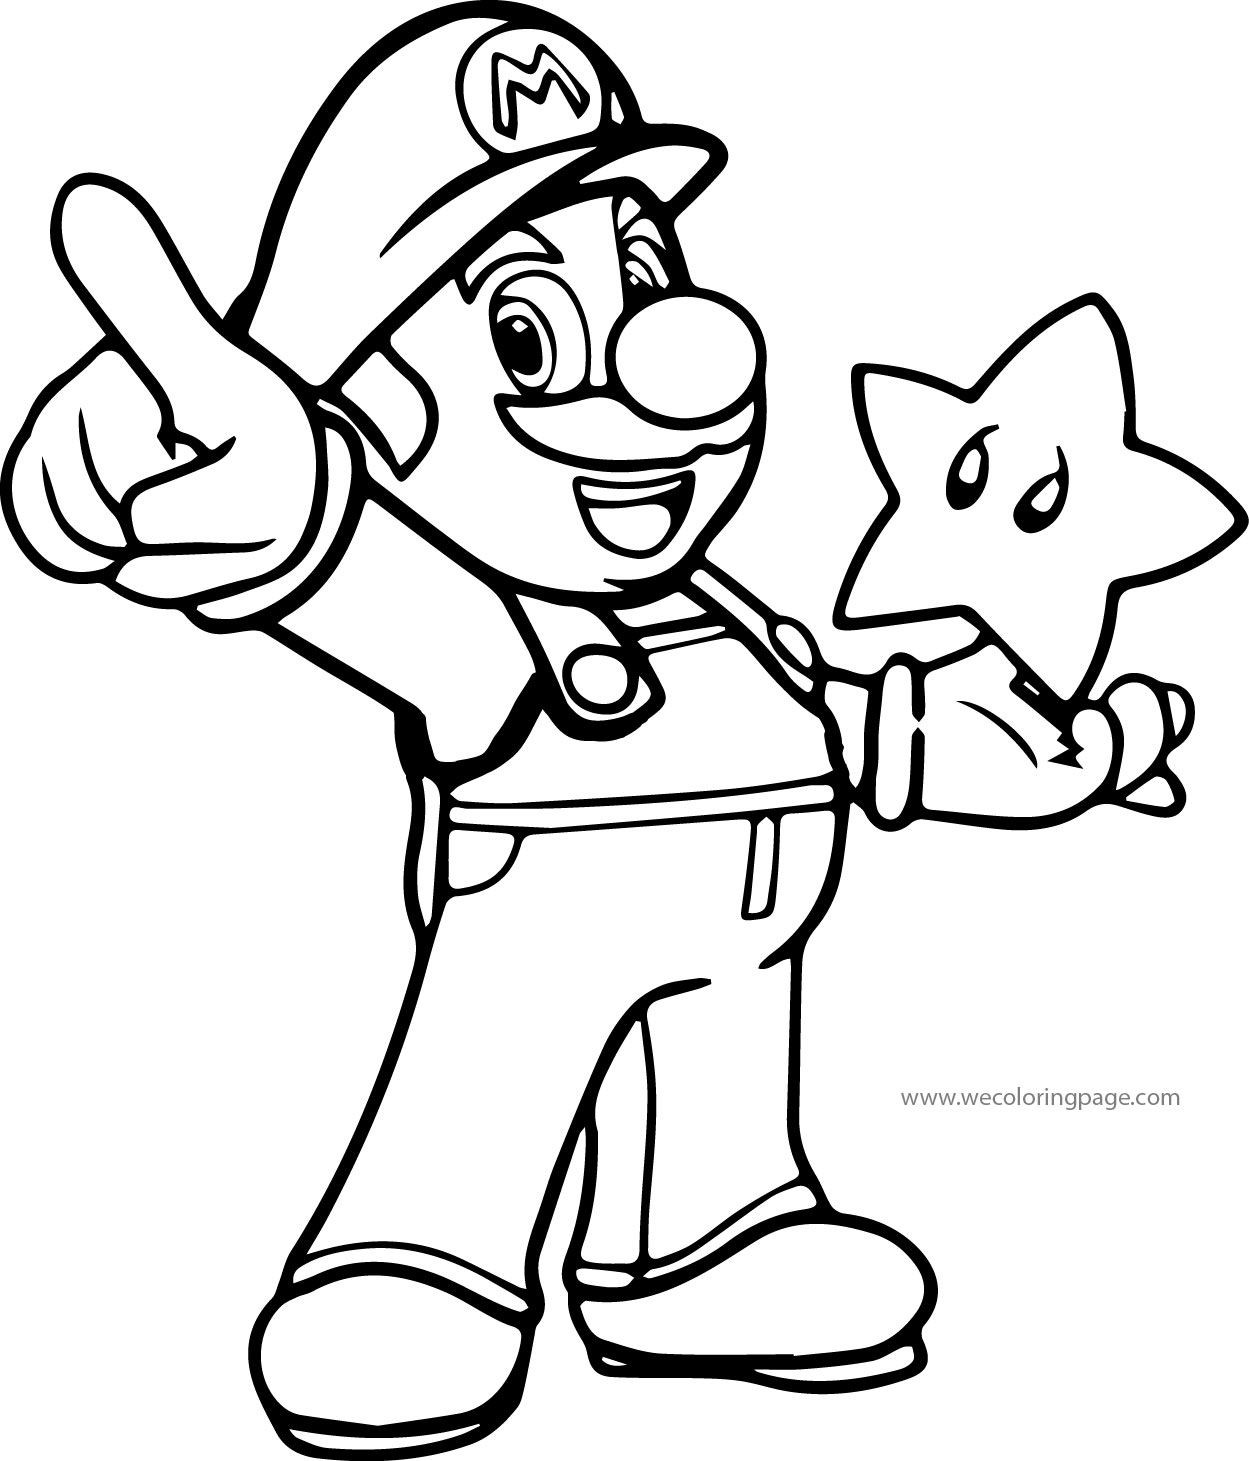 Mario Coloring Pages For Kids
 Super Mario Coloring Page wecoloringpage